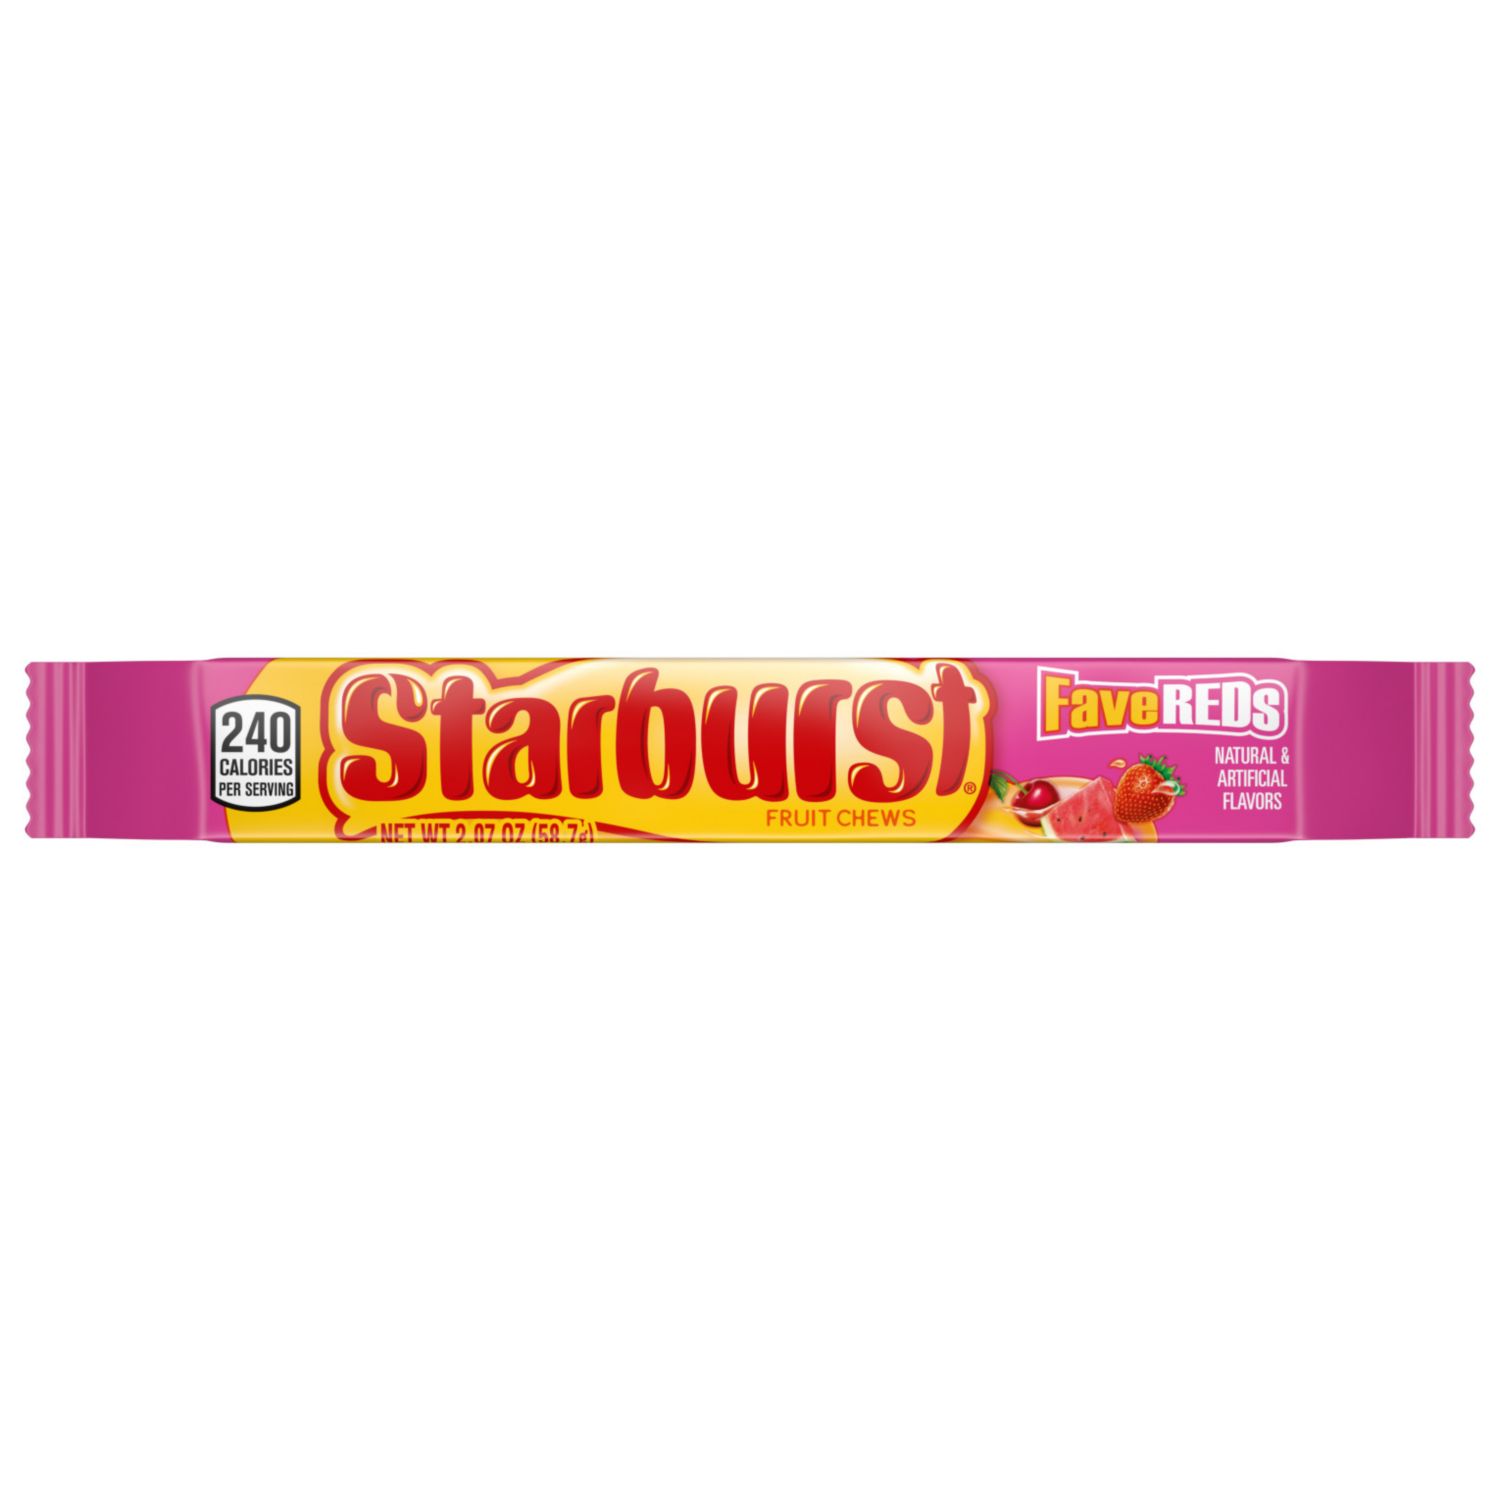 Starburst FaveREDs Fruit Chews Chewy Candy, Full Size, 2.07 oz